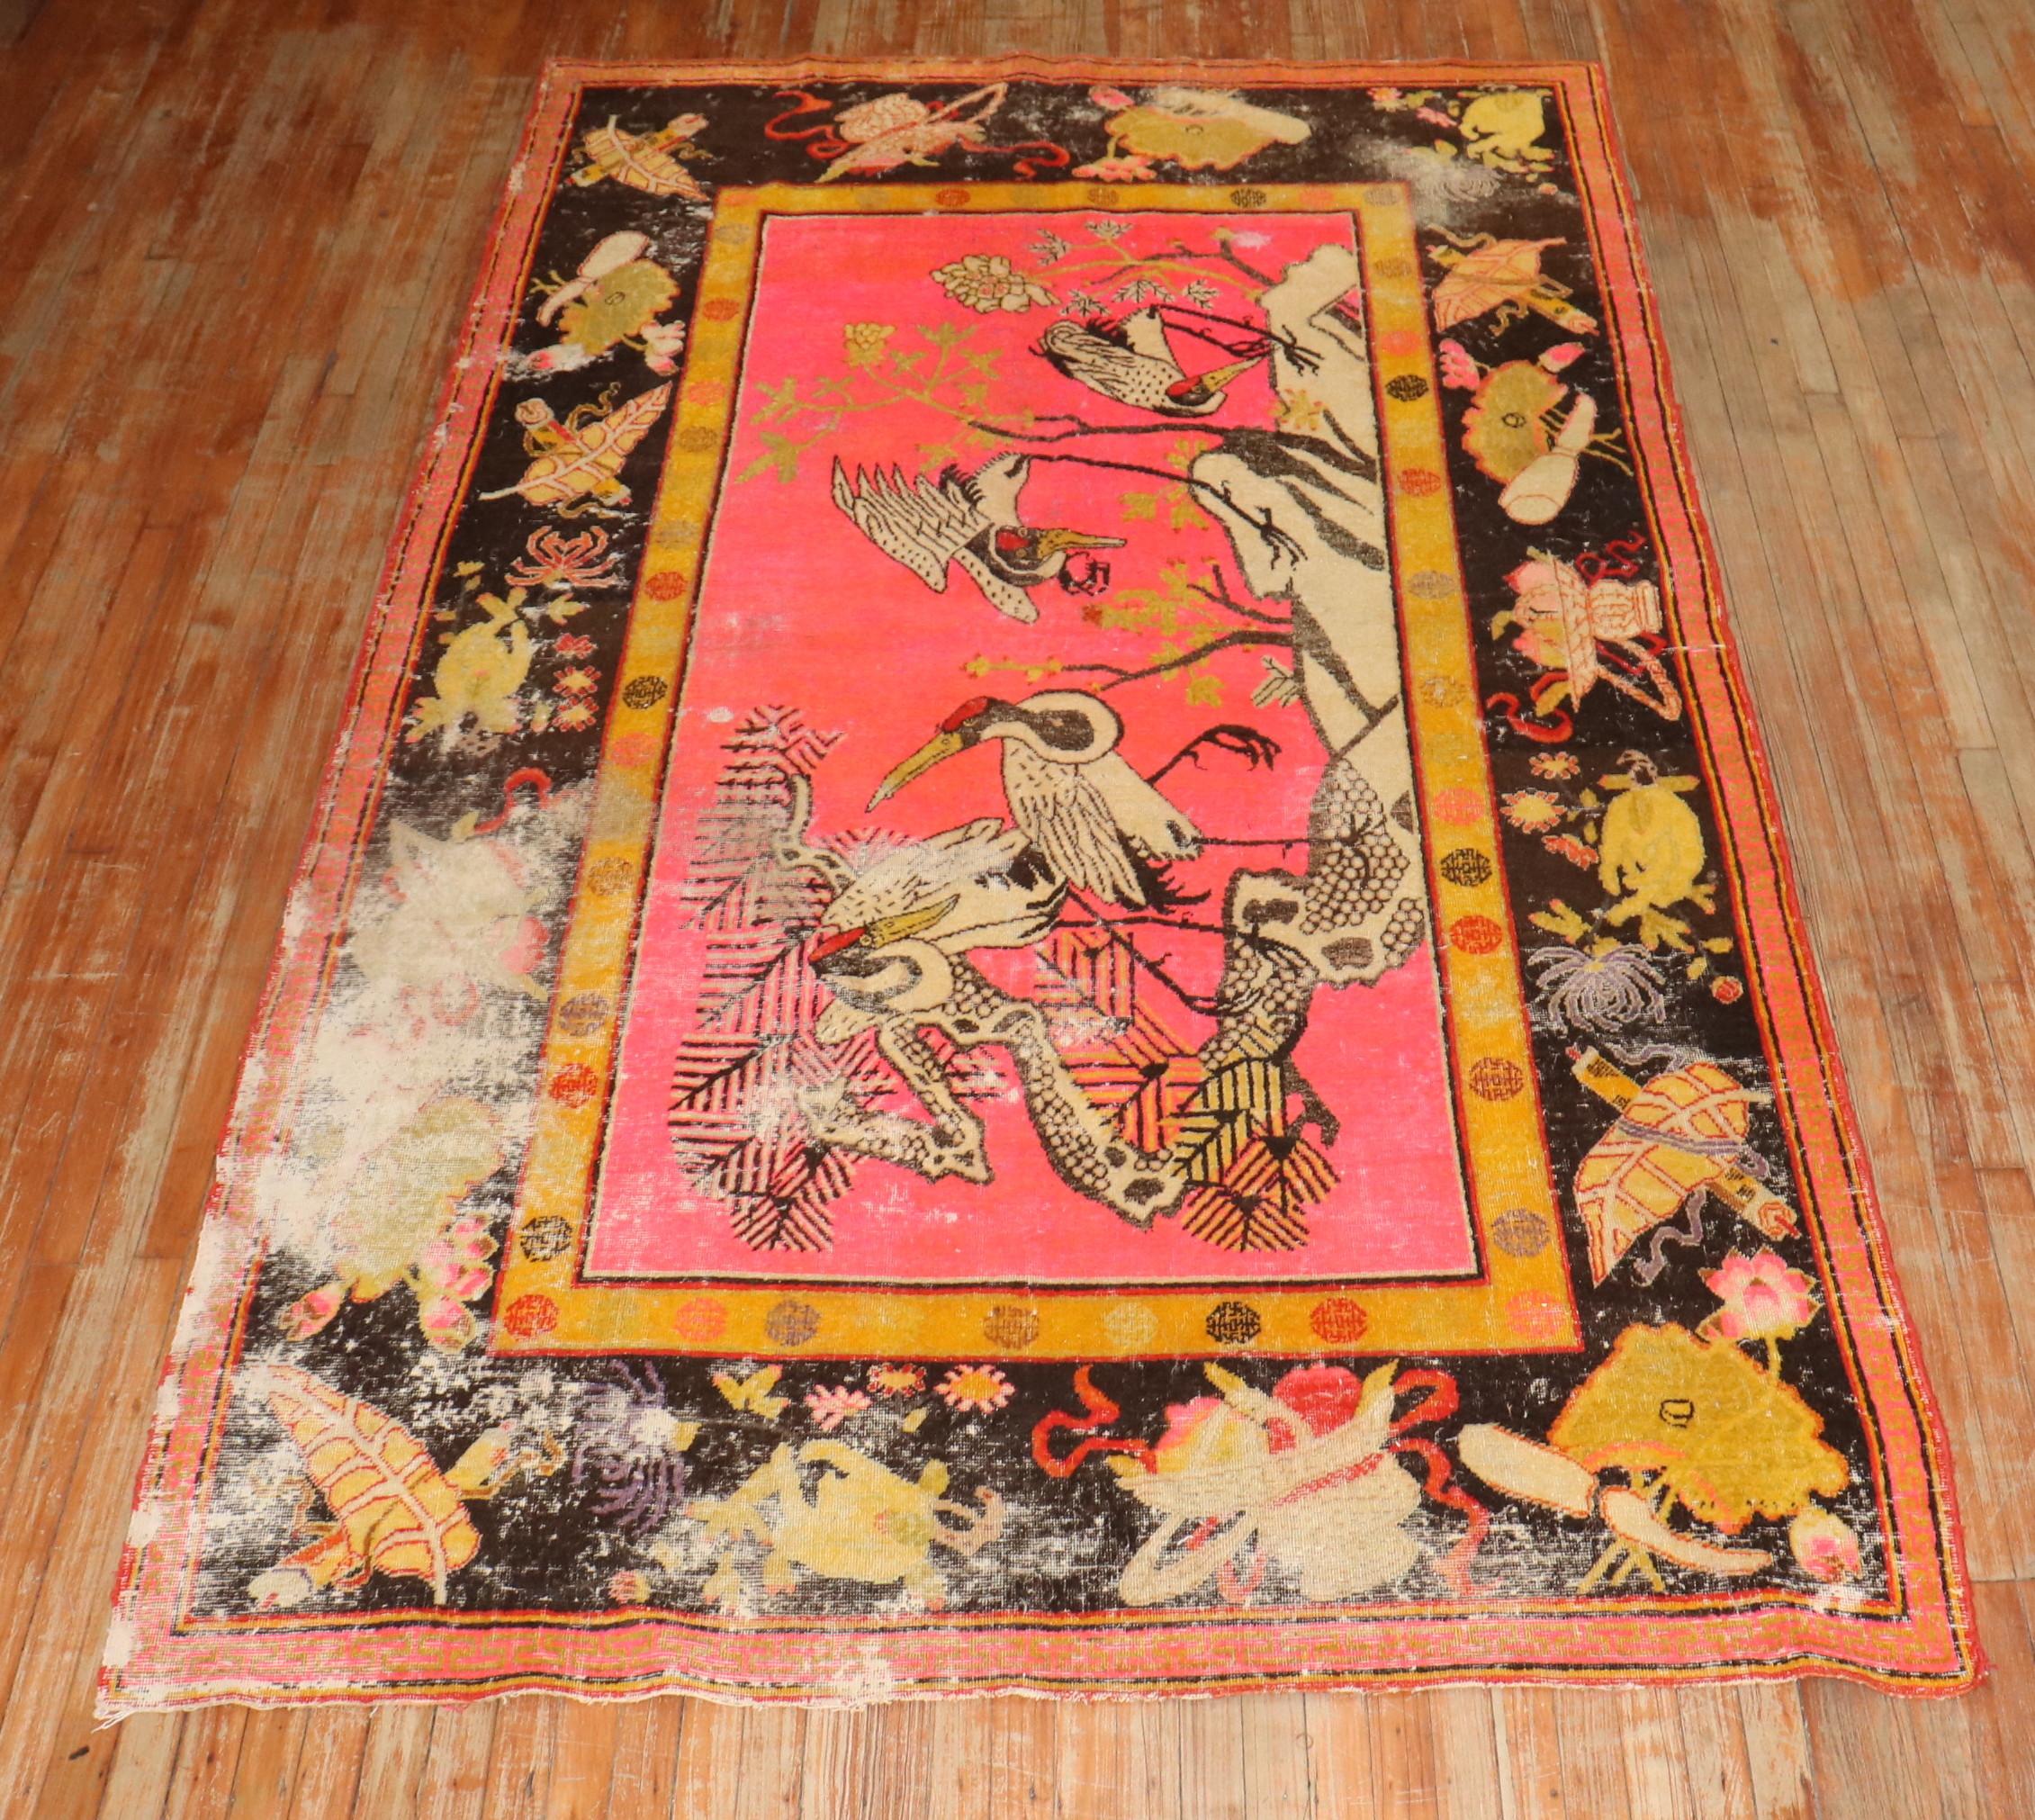 Zabihi Collection Bright Pink Antique Worn Flamingo Pictorial Khotan Rug For Sale 8